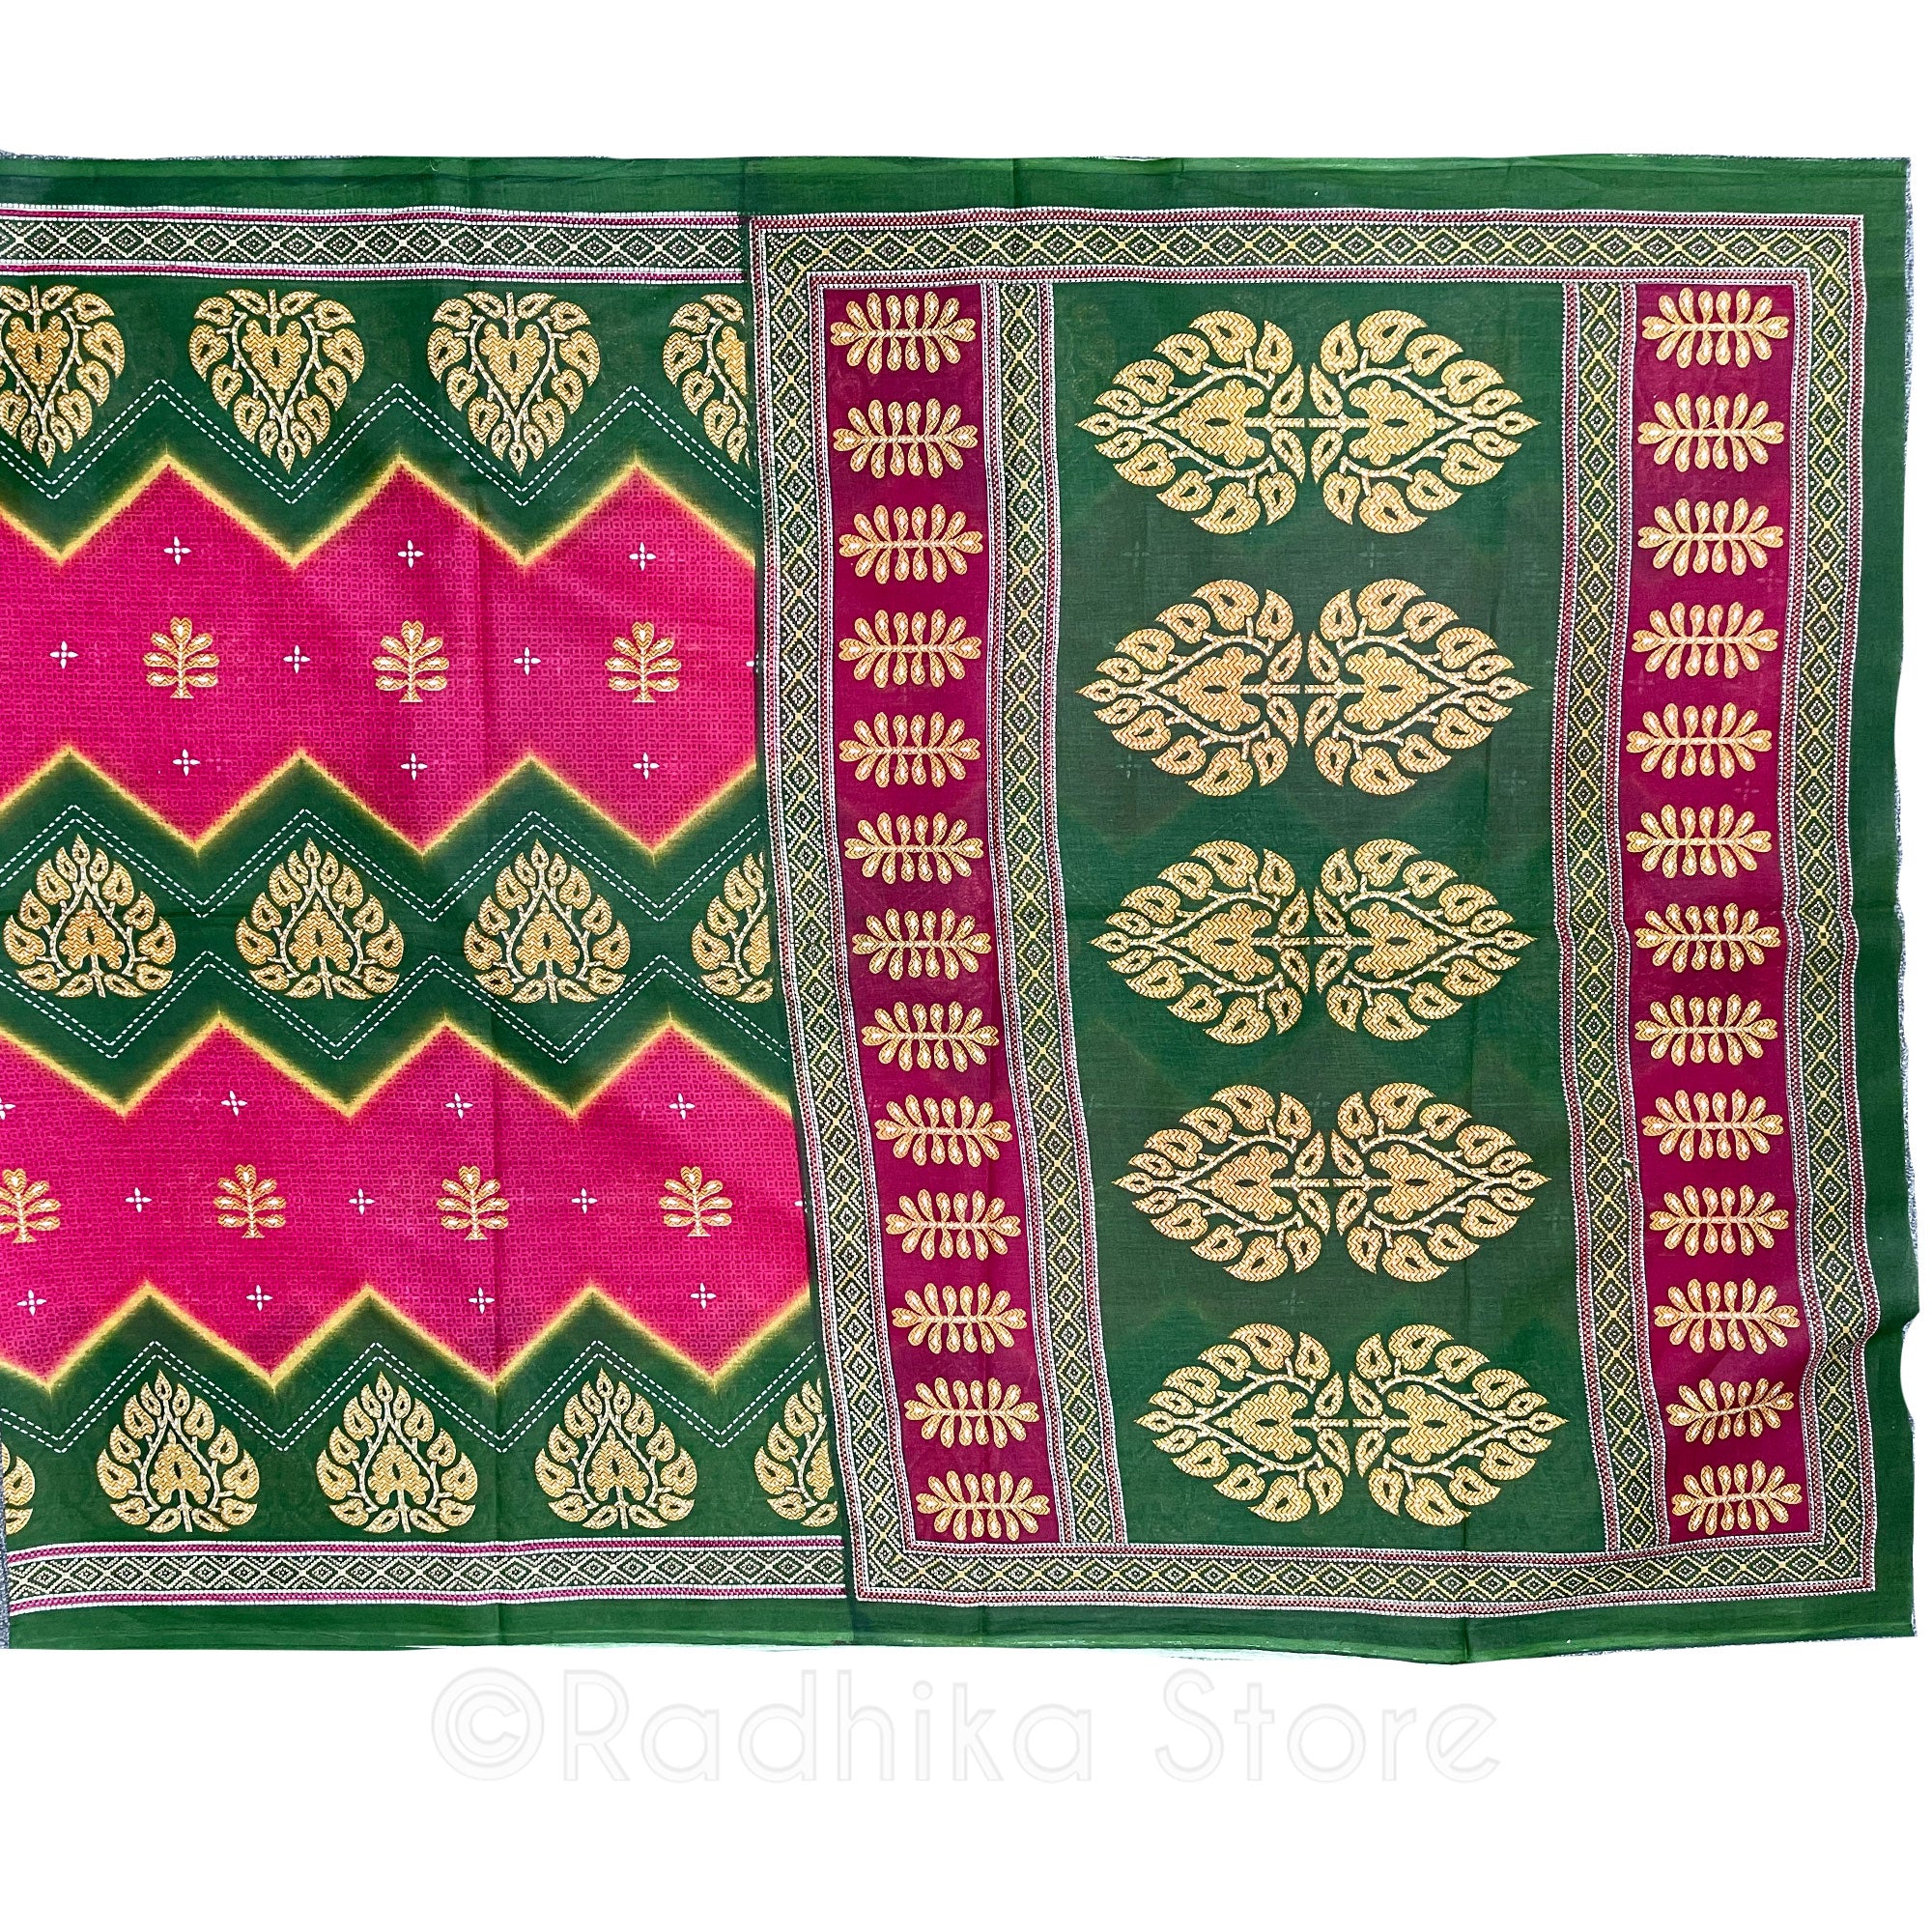 Vedic Designs - Green and Bright Pink- Cotton Saree